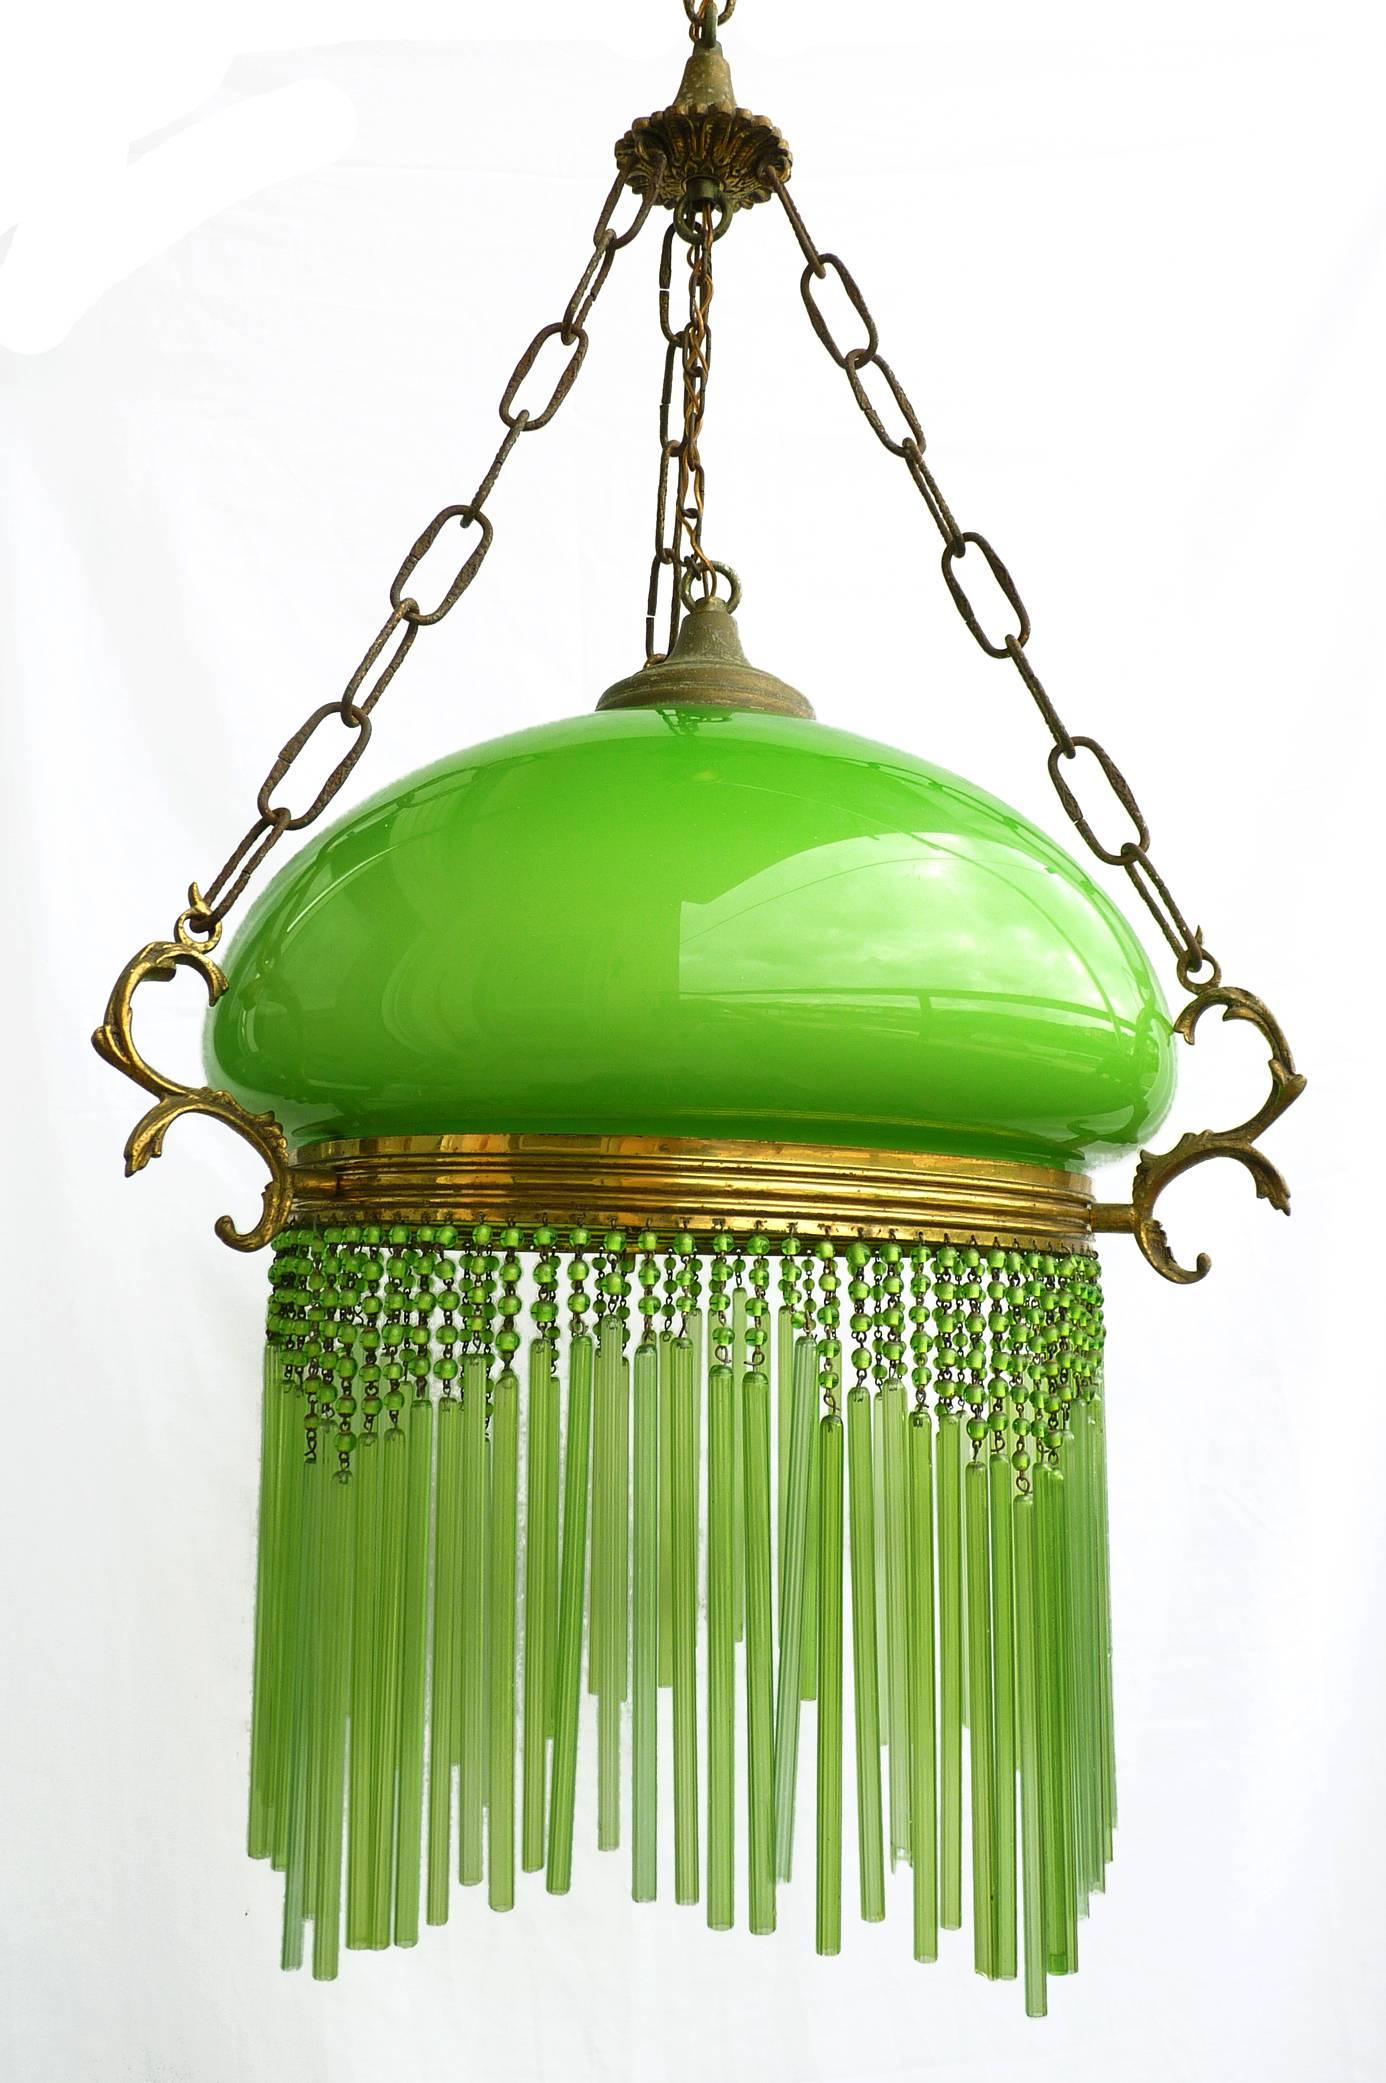 Beautiful large Italian Art Nouveau/Art Deco chandelier or hanging lamp with opaline cased green glass shade and green glass straws
Measures:
Diameter 20 inches / 50 cm
Height 36 inches / 90 cm
Weight: 9 lb. (4 kg)
One light bulb E27-60 W, good